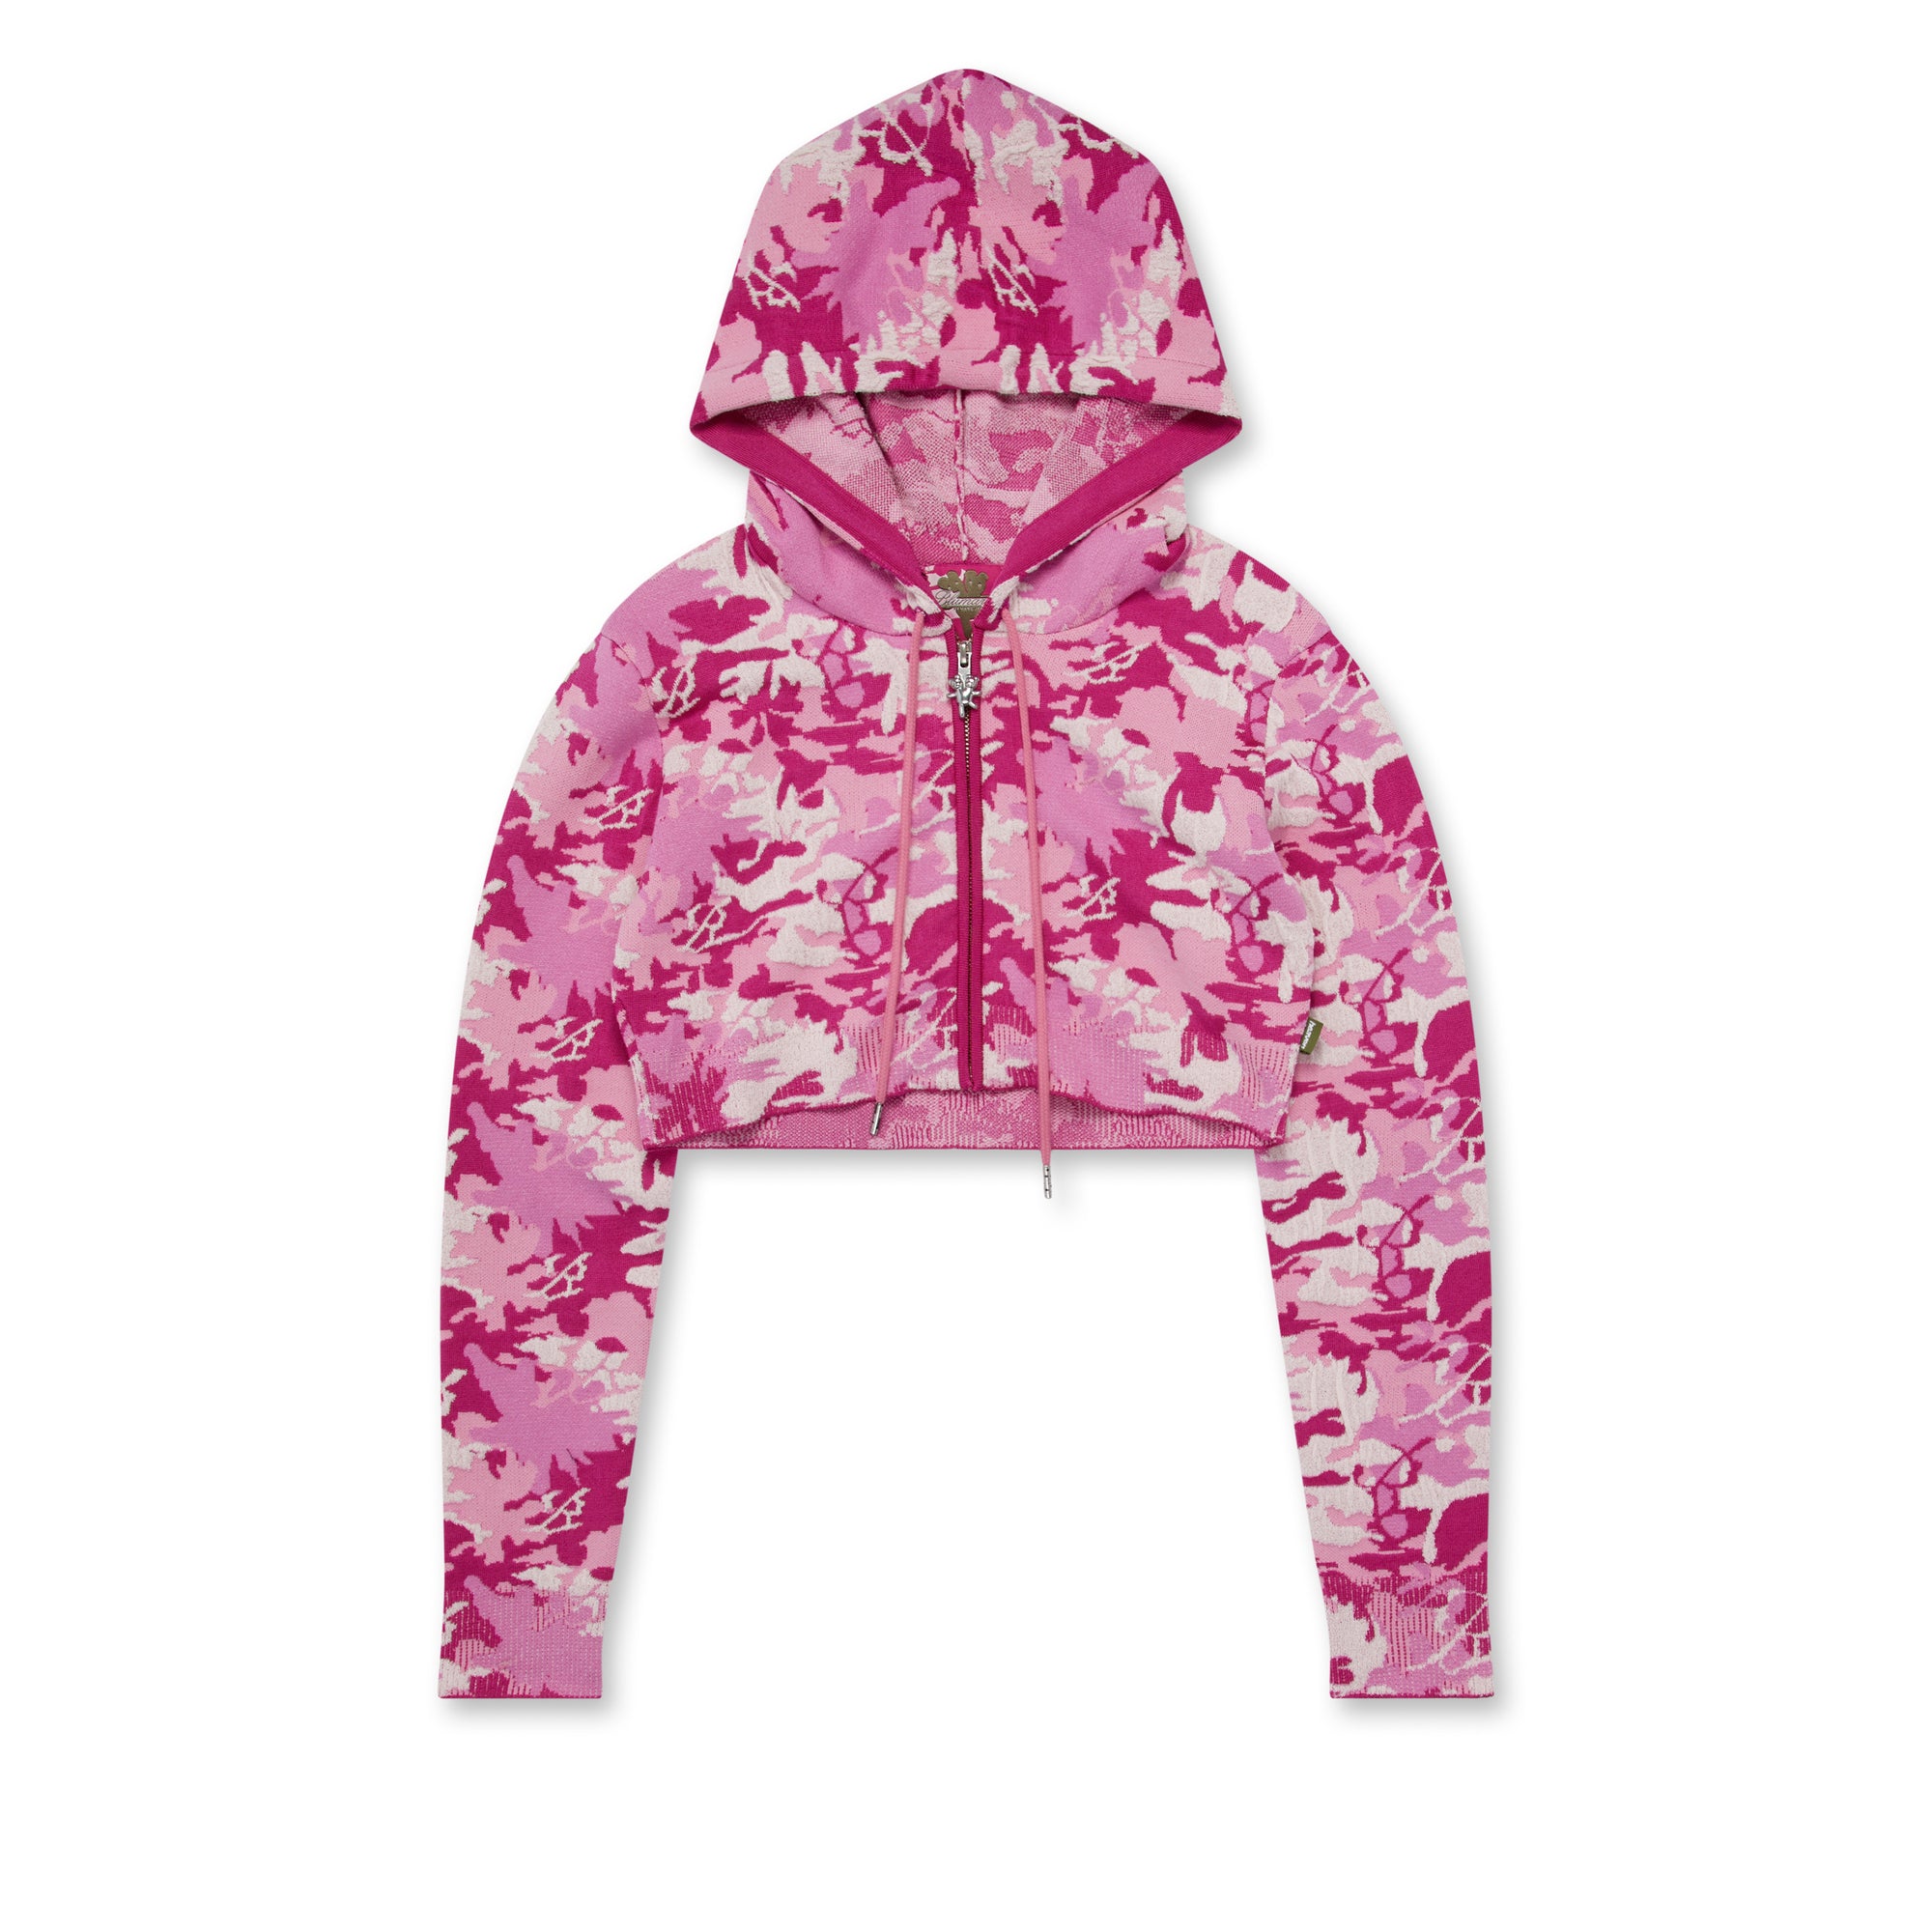 Blumarine by Marc Jacobs - Women's Camo Cropped Hoodie - (Pink Multi) view 1